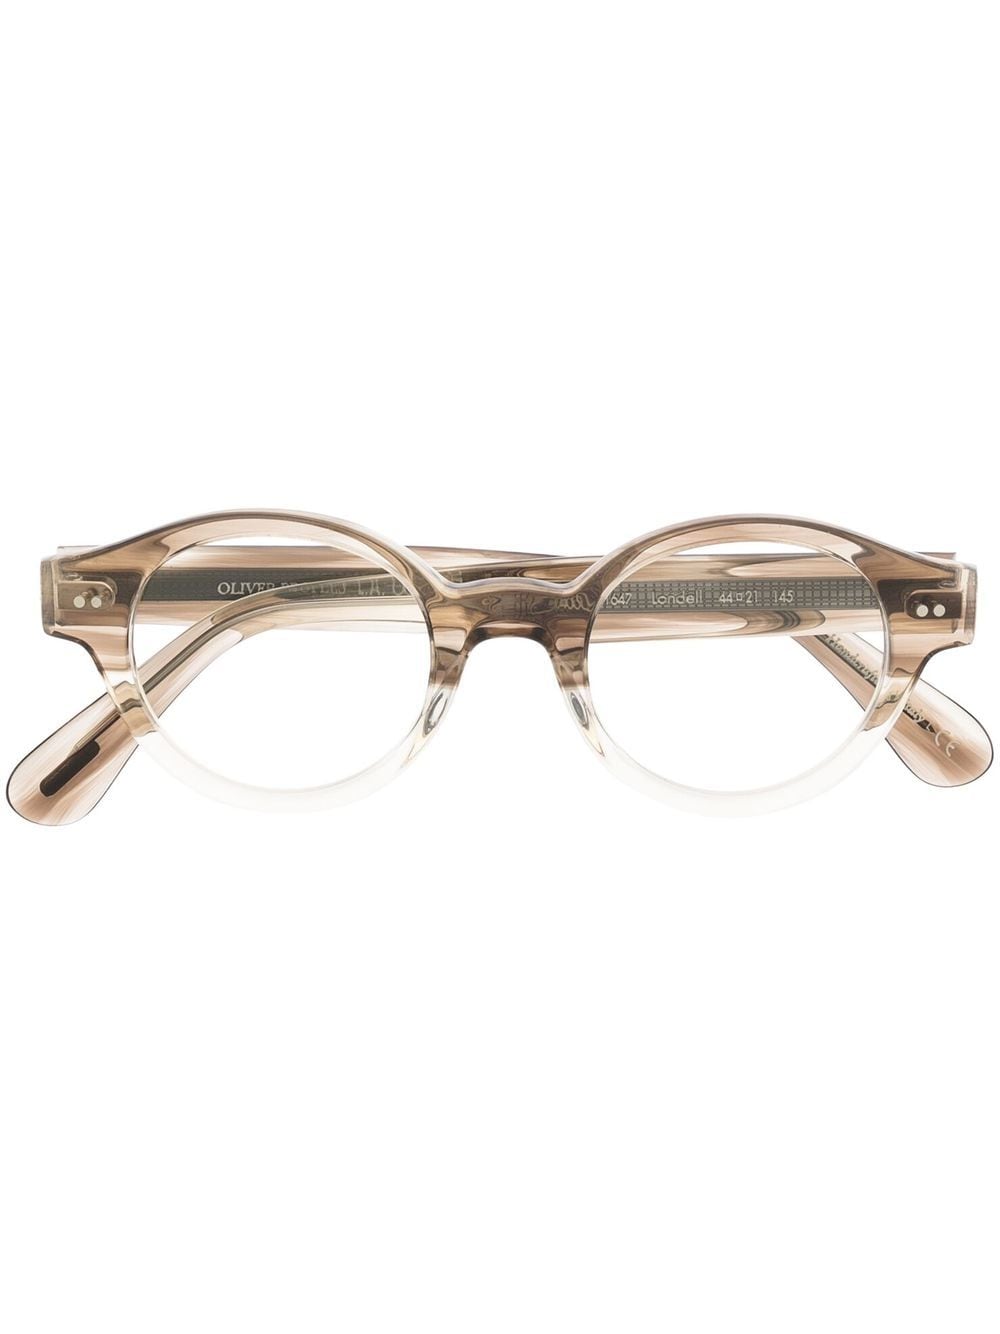 Oliver Peoples Londell Oval Glasses - Farfetch